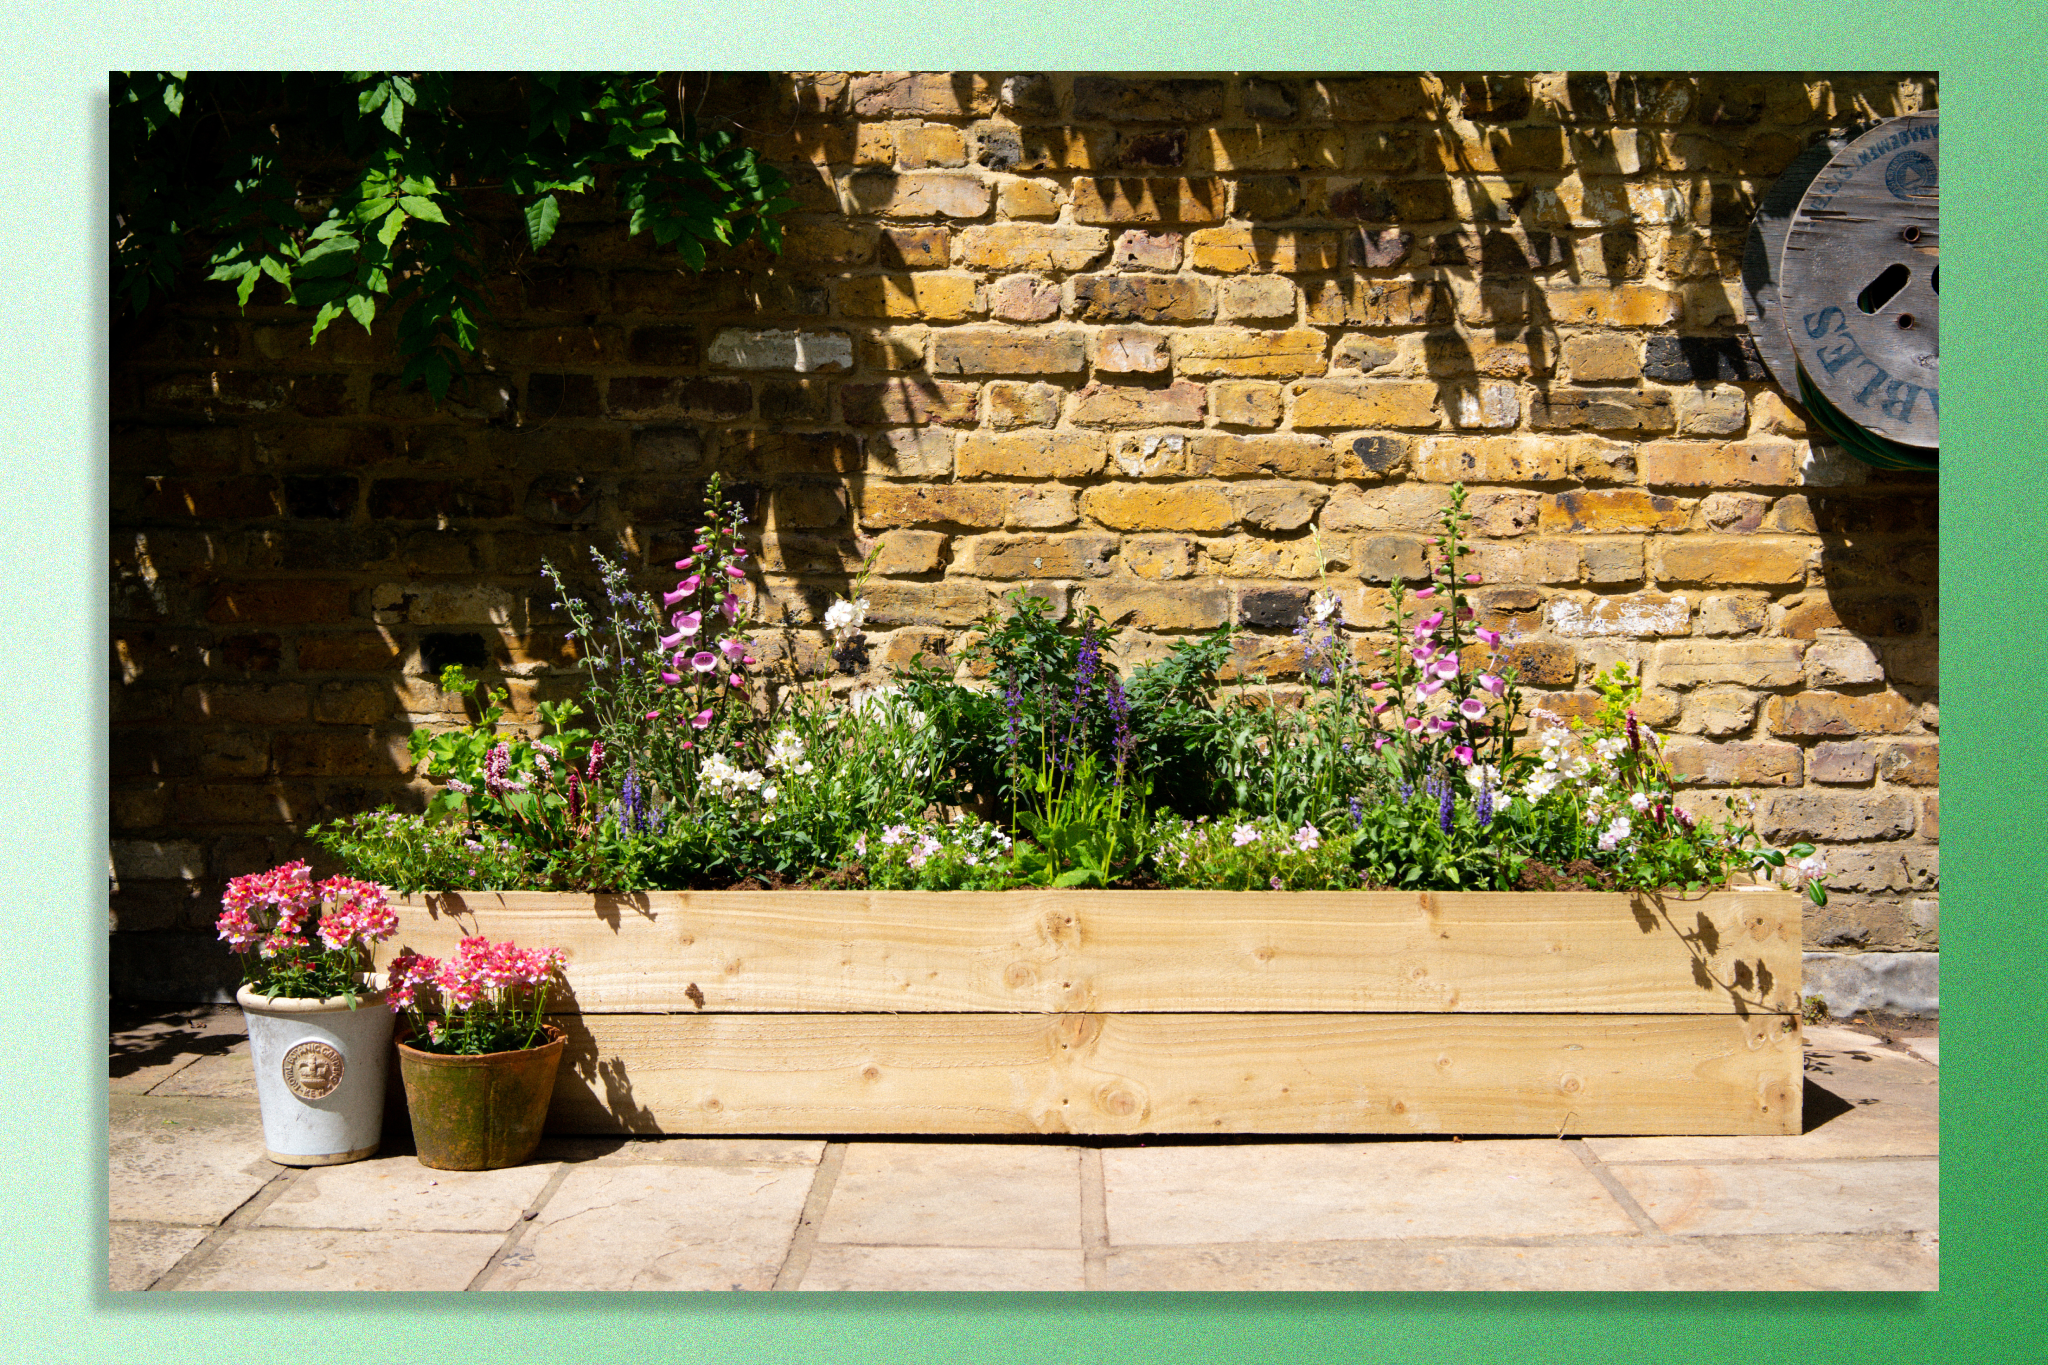 Dig Club delivers instant flower beds to your door – and we’re obsessed